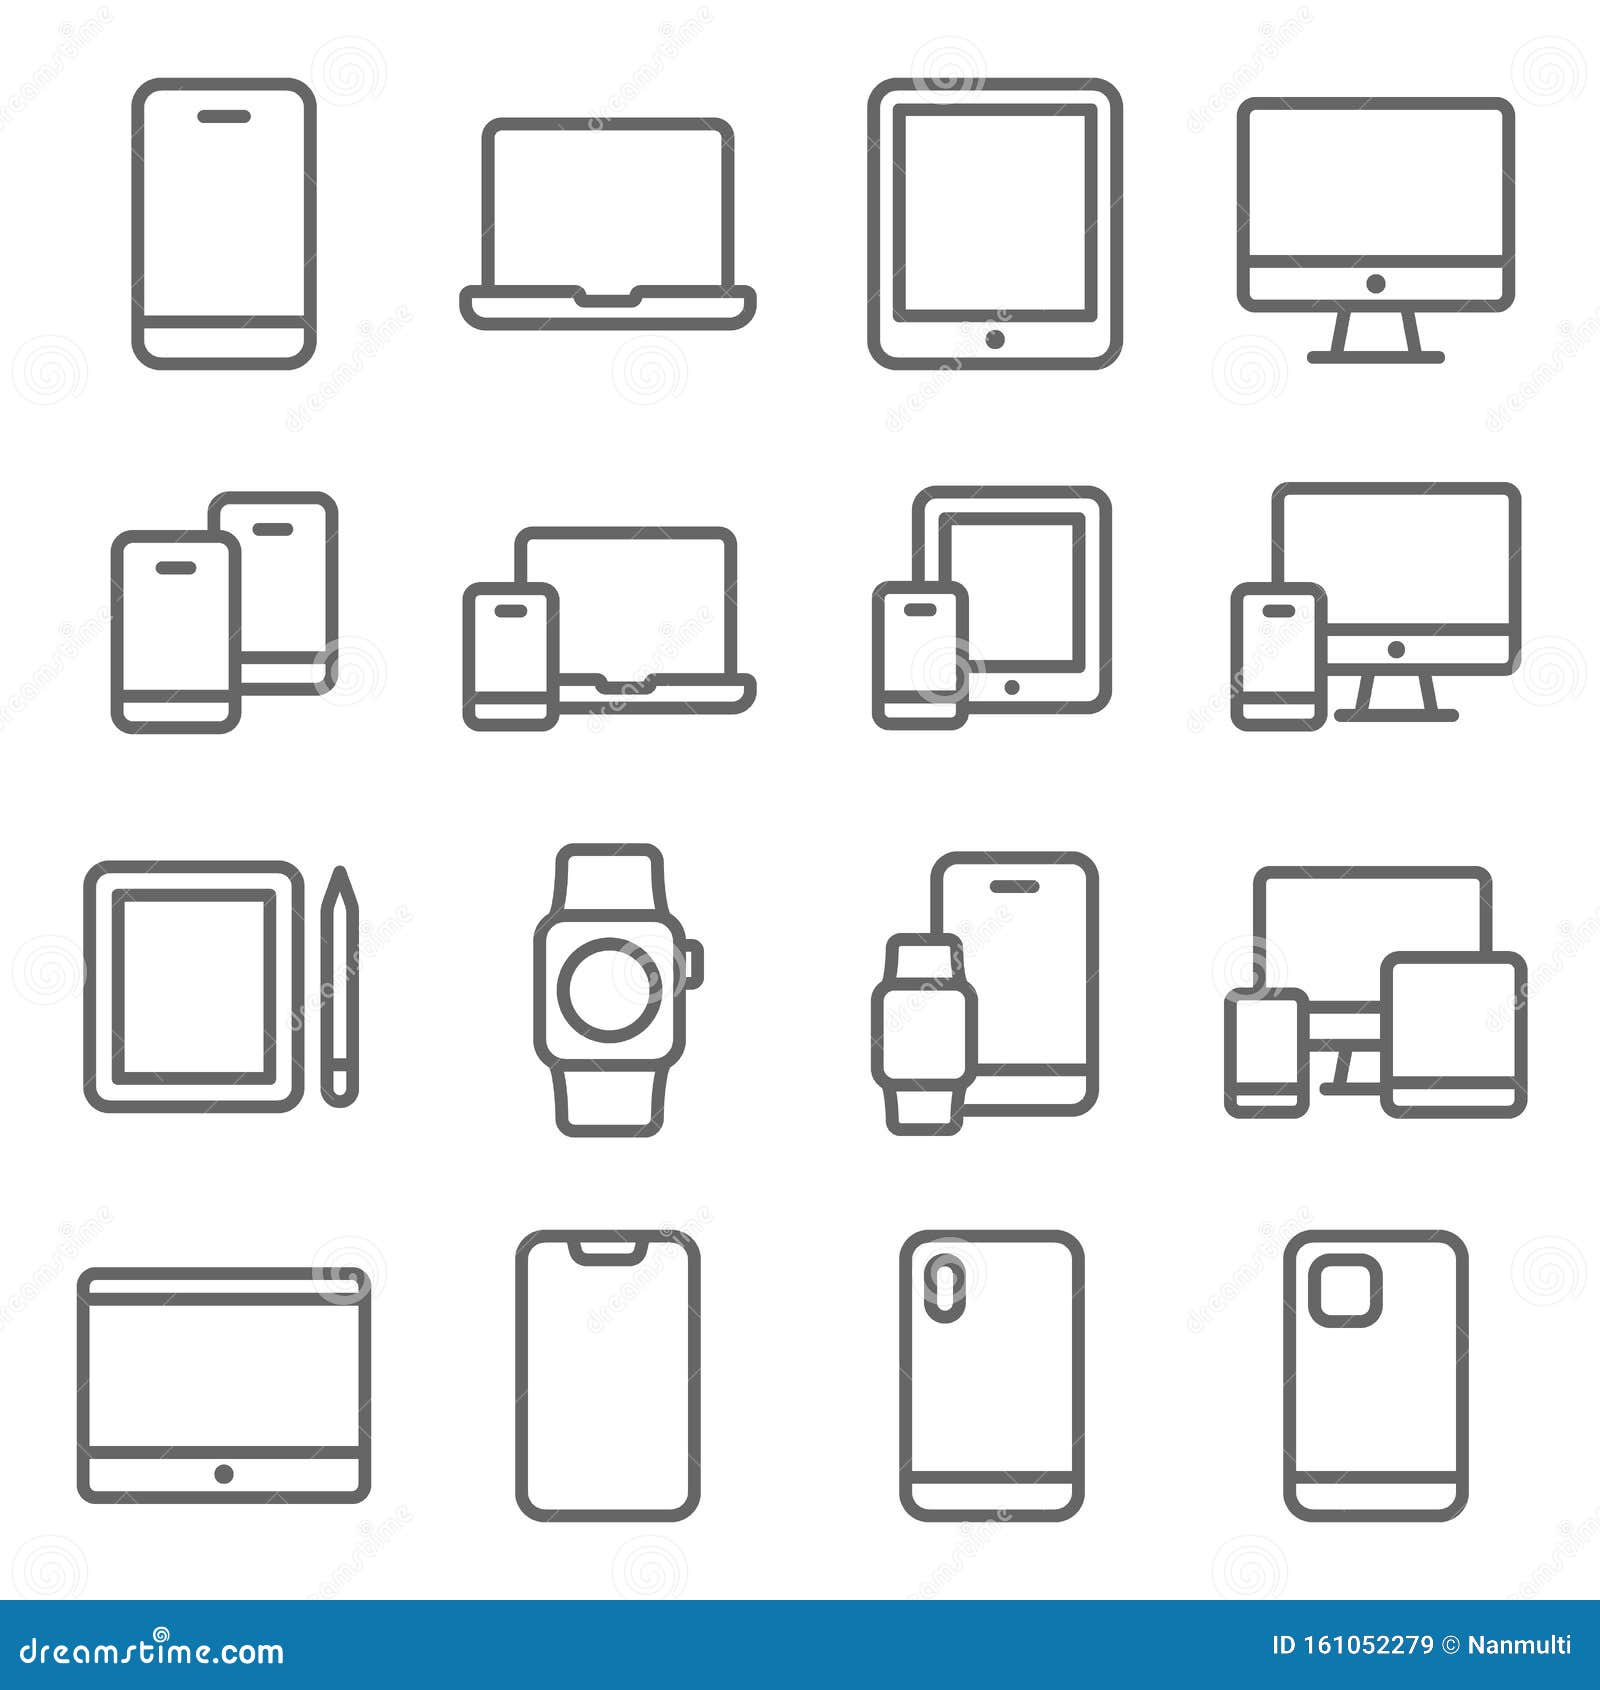 mobile device icons set  . contains such icon as tablet, smartphone, desktop,smart watch, and more. expanded str